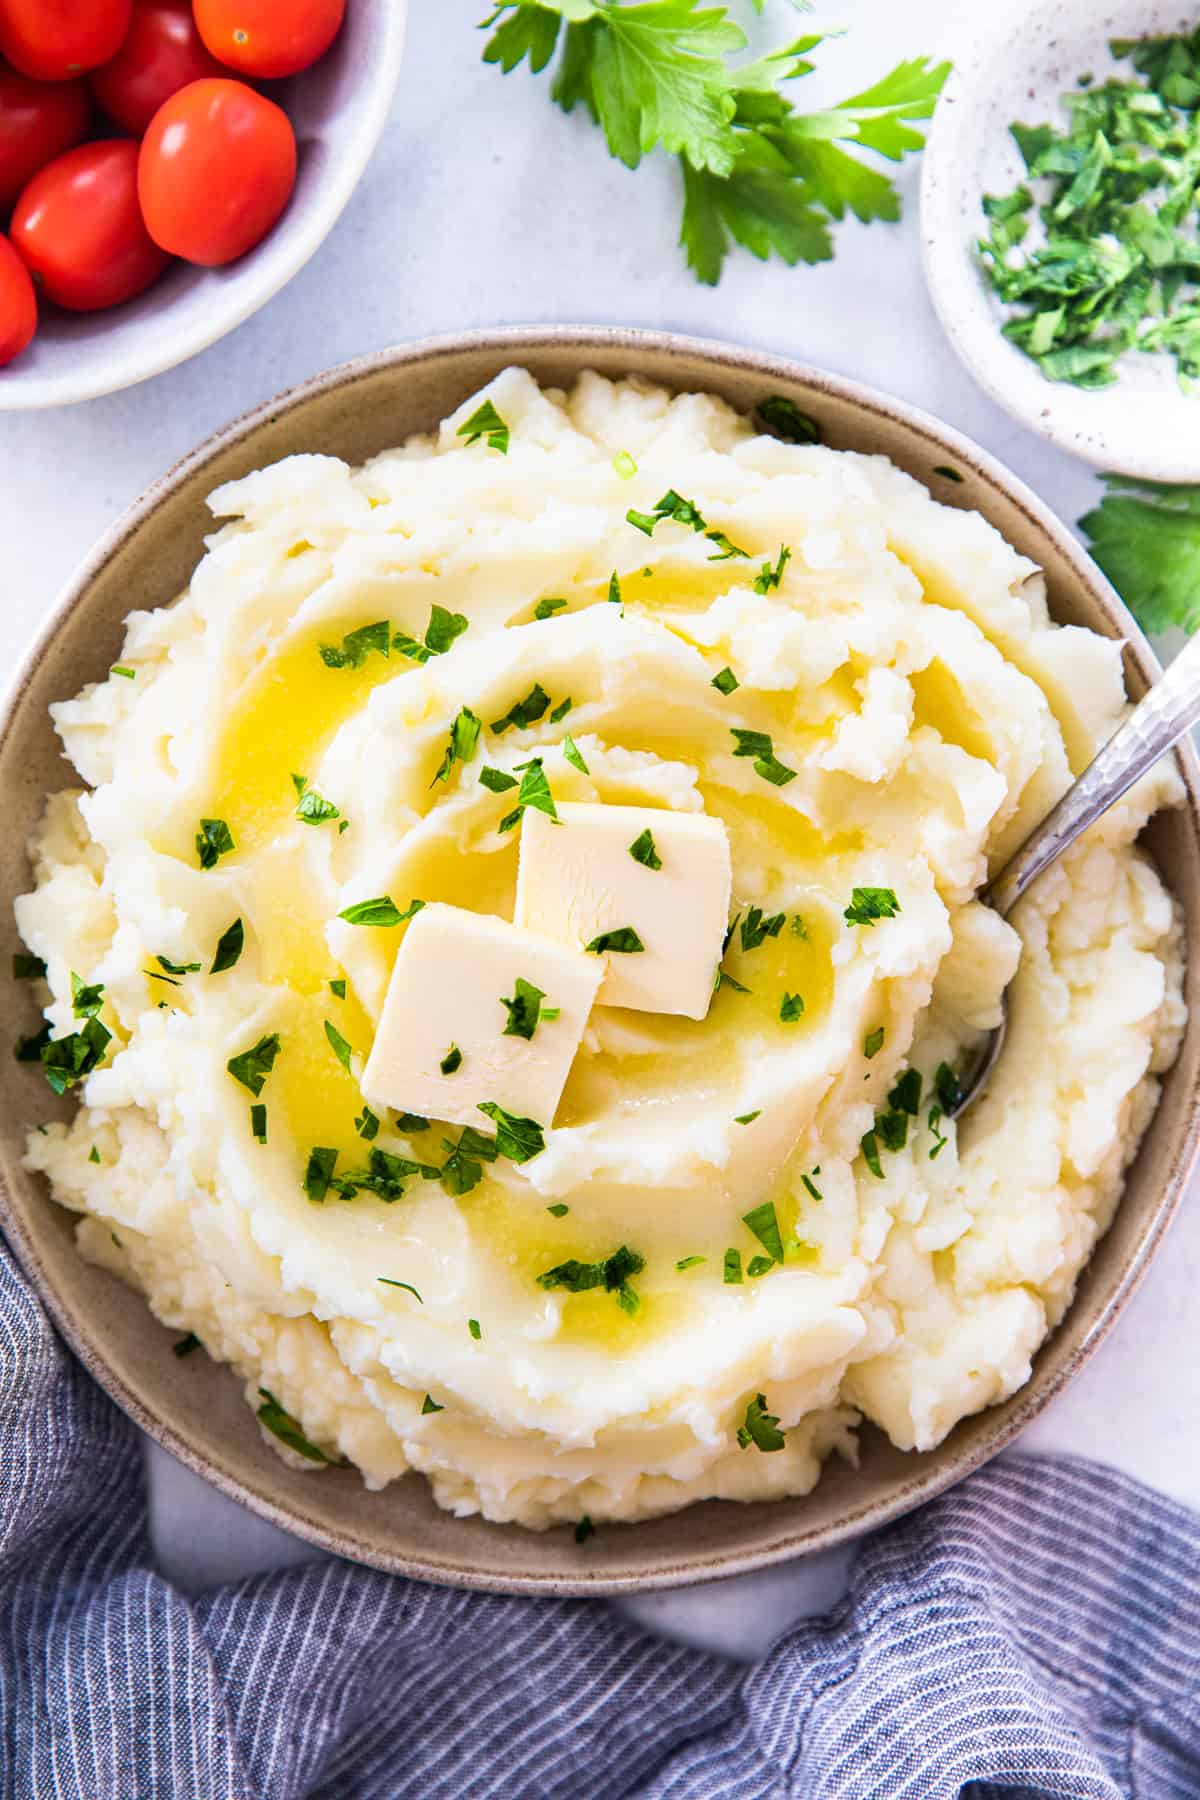 Mashed potatoes, topped with butter and chopped parsley in a bowl.